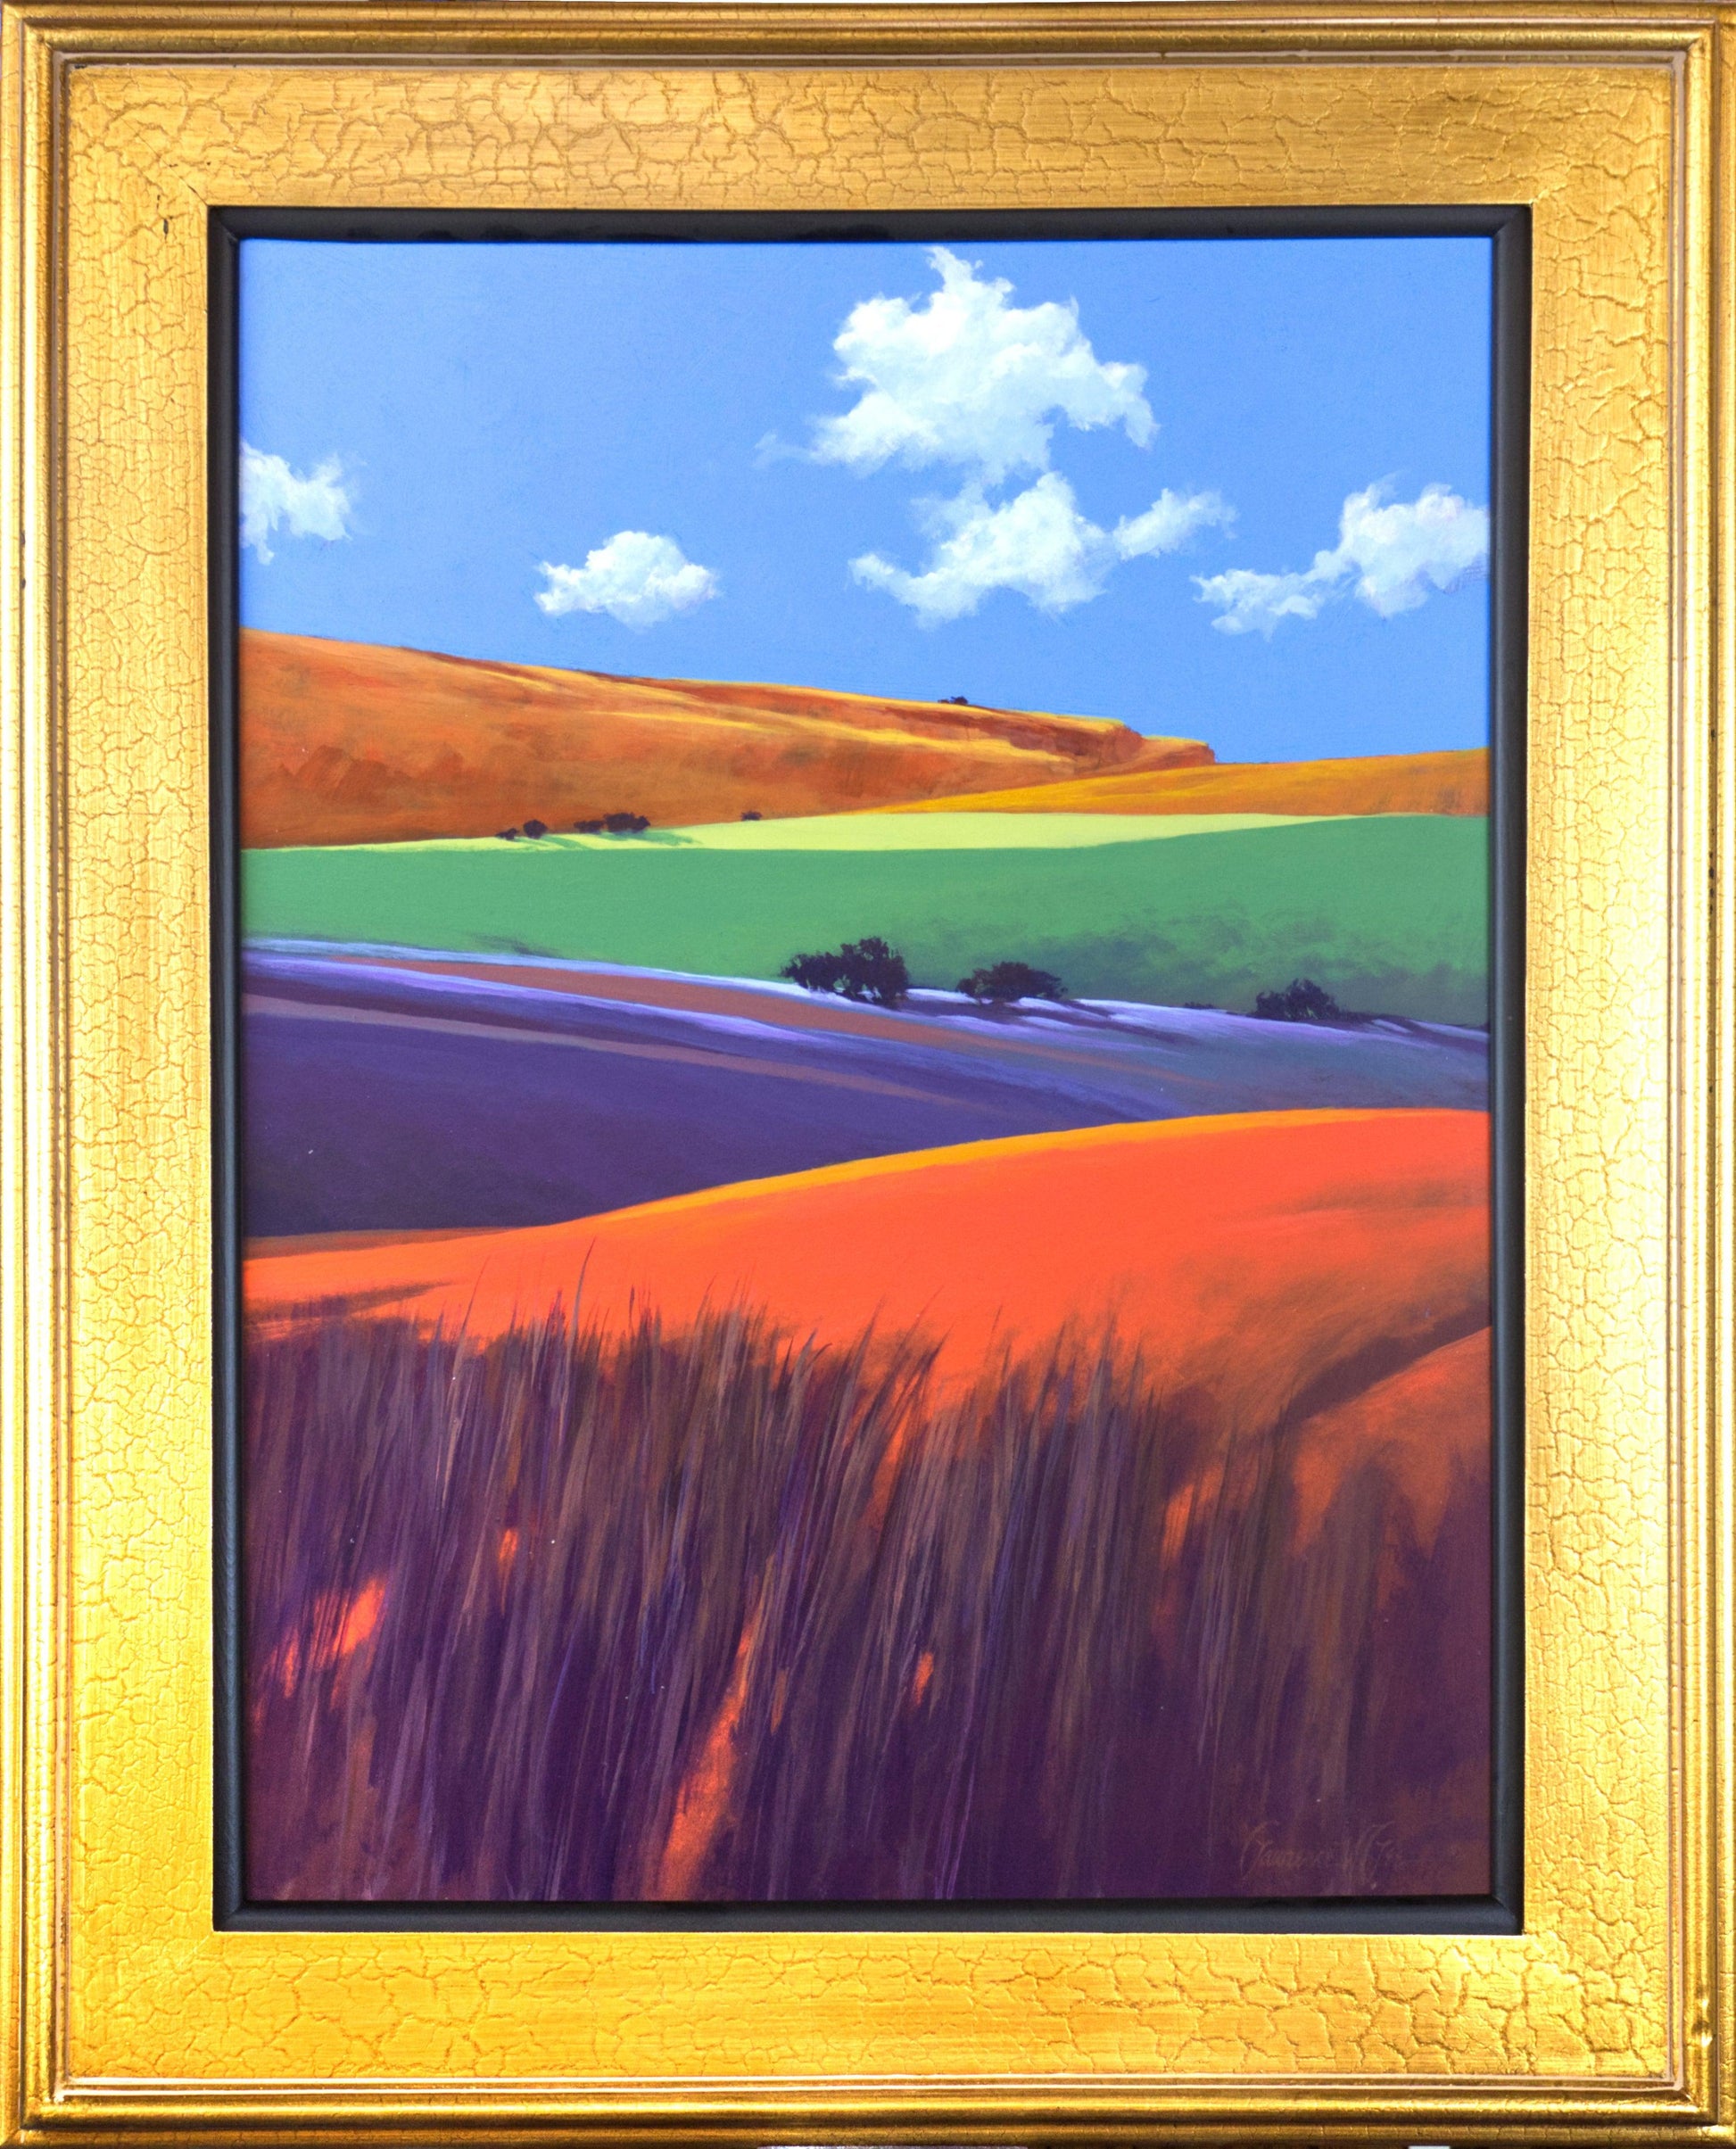 South of Big Candy Mountain-Painting-Lawrence Lee-Sorrel Sky Gallery